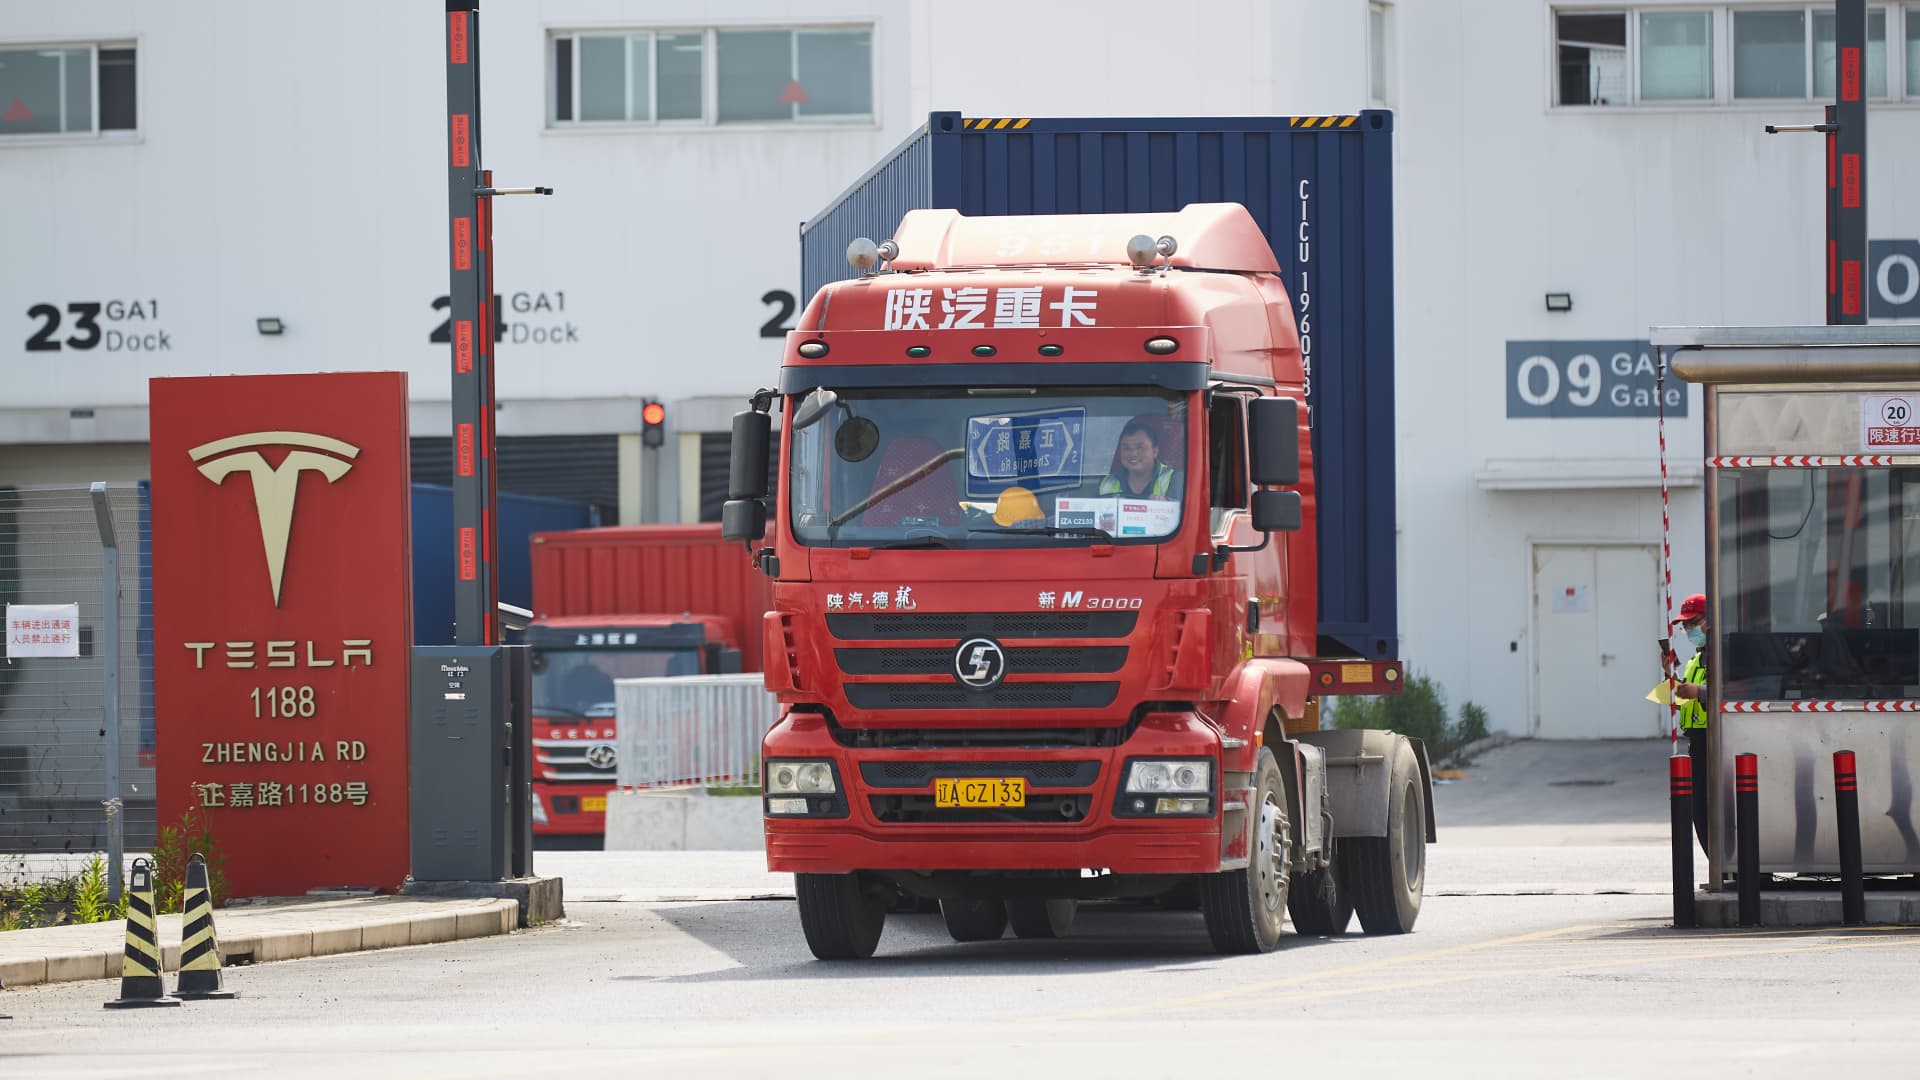 A truck leaves the Tesla Shanghai Gigafactory on April 25, 2021 in Shanghai, China.